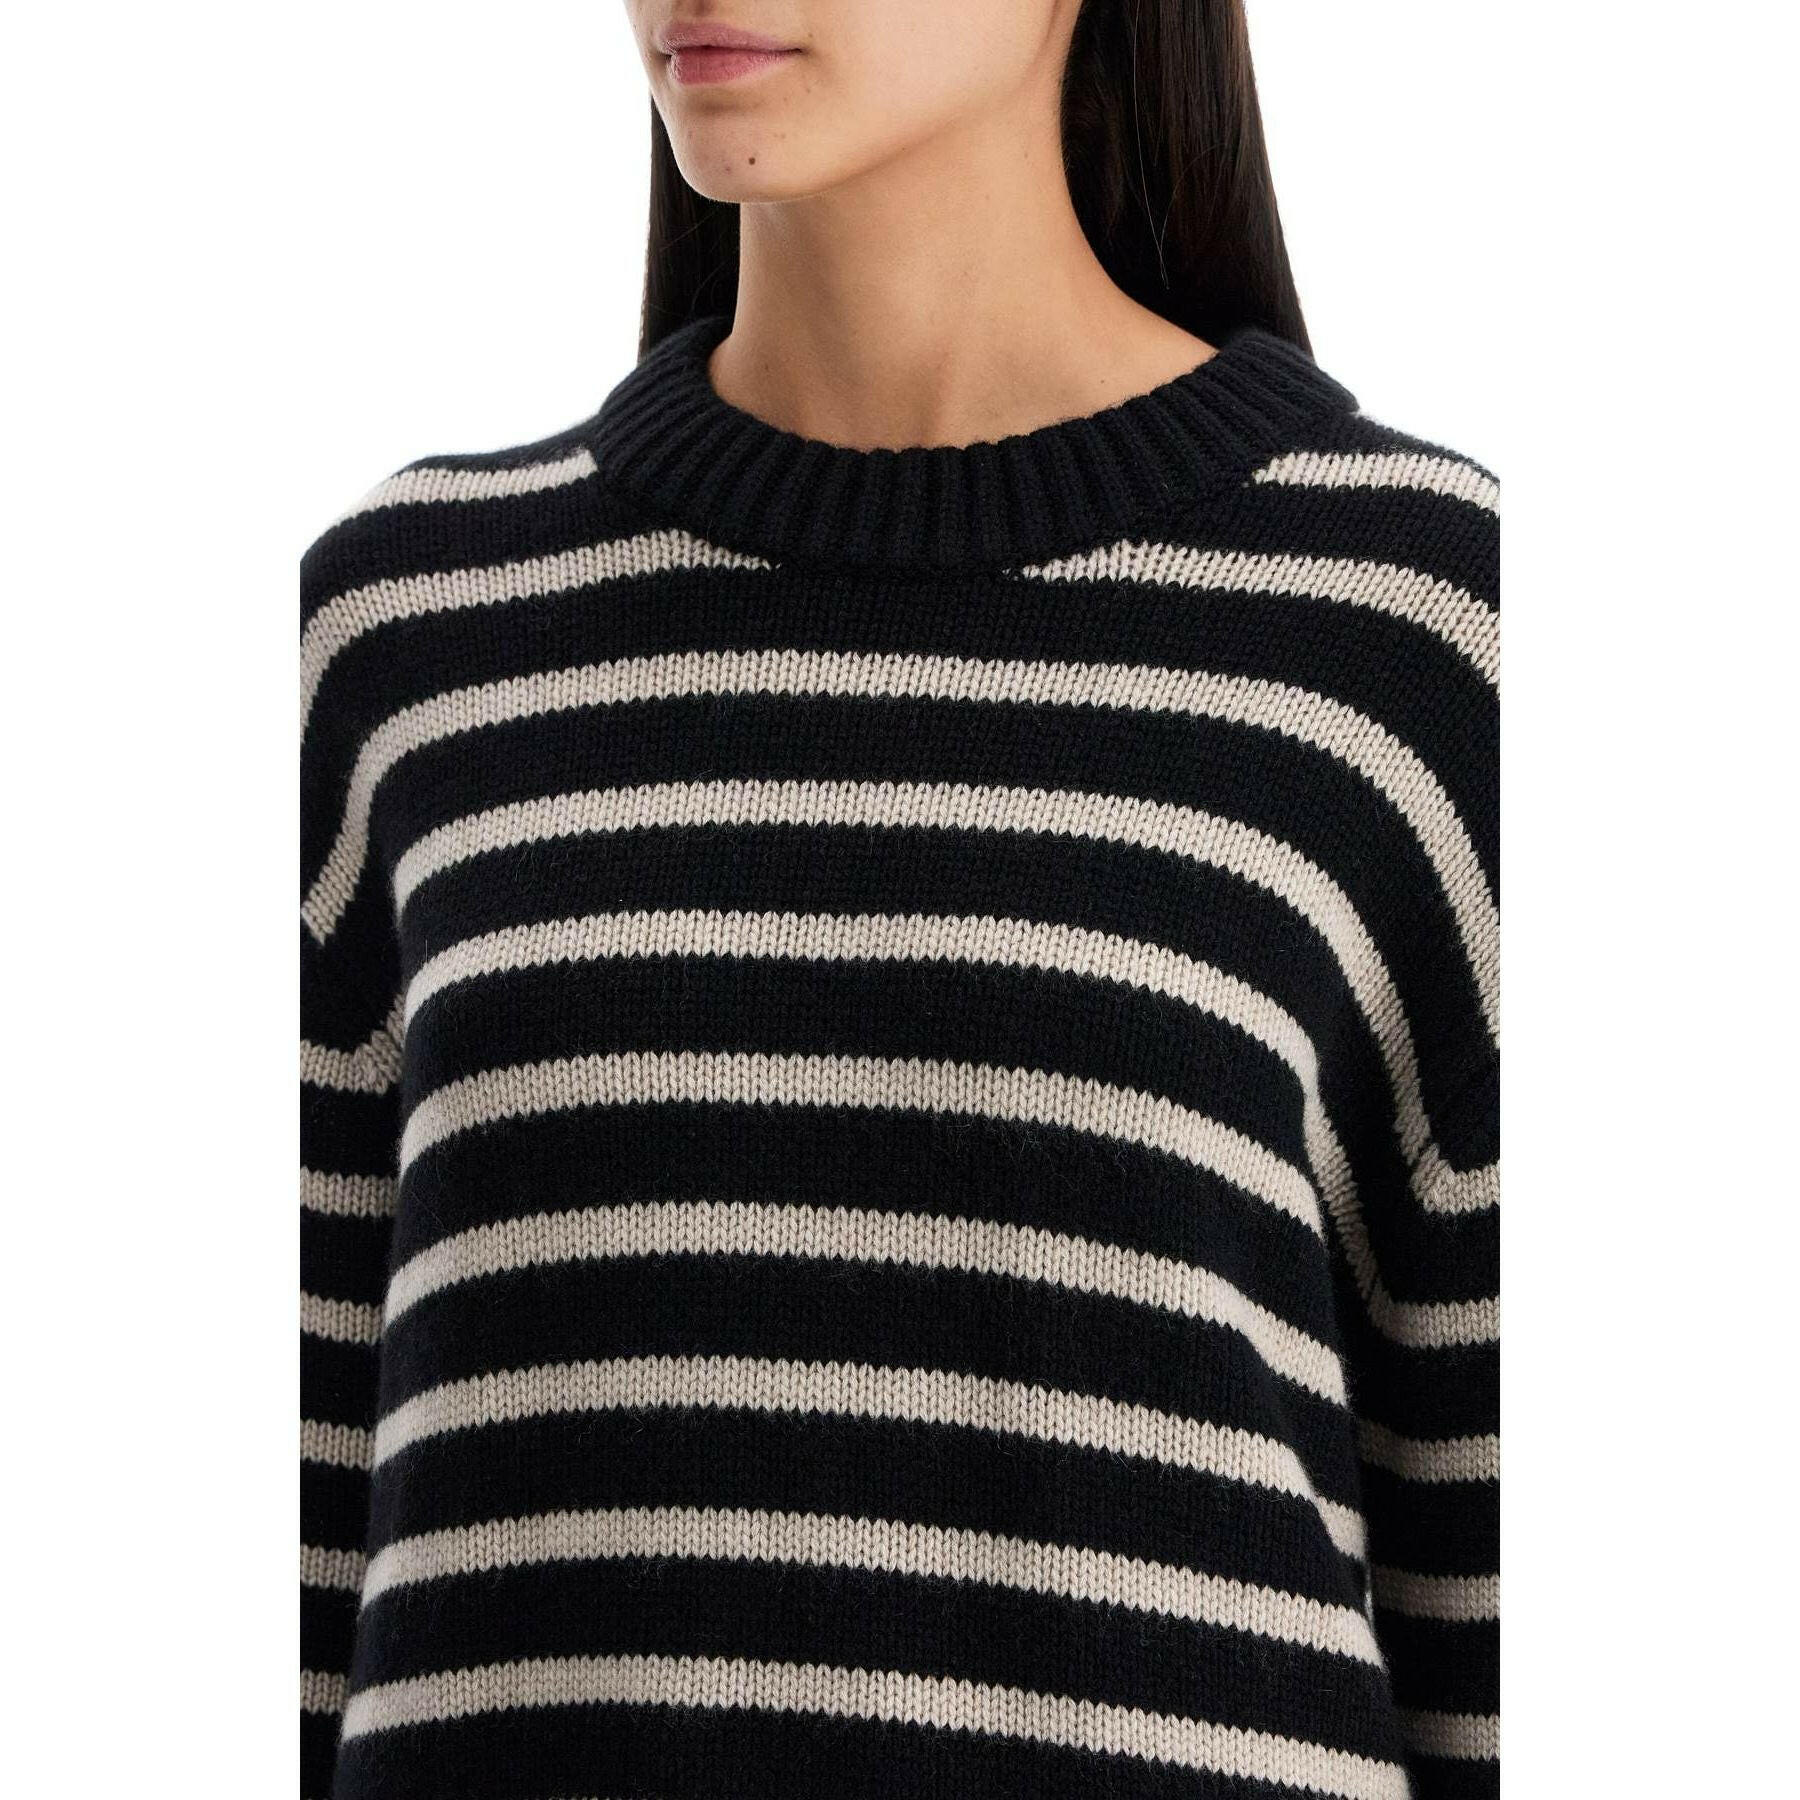 Striped Cashmere Sony Pullover Sweater.